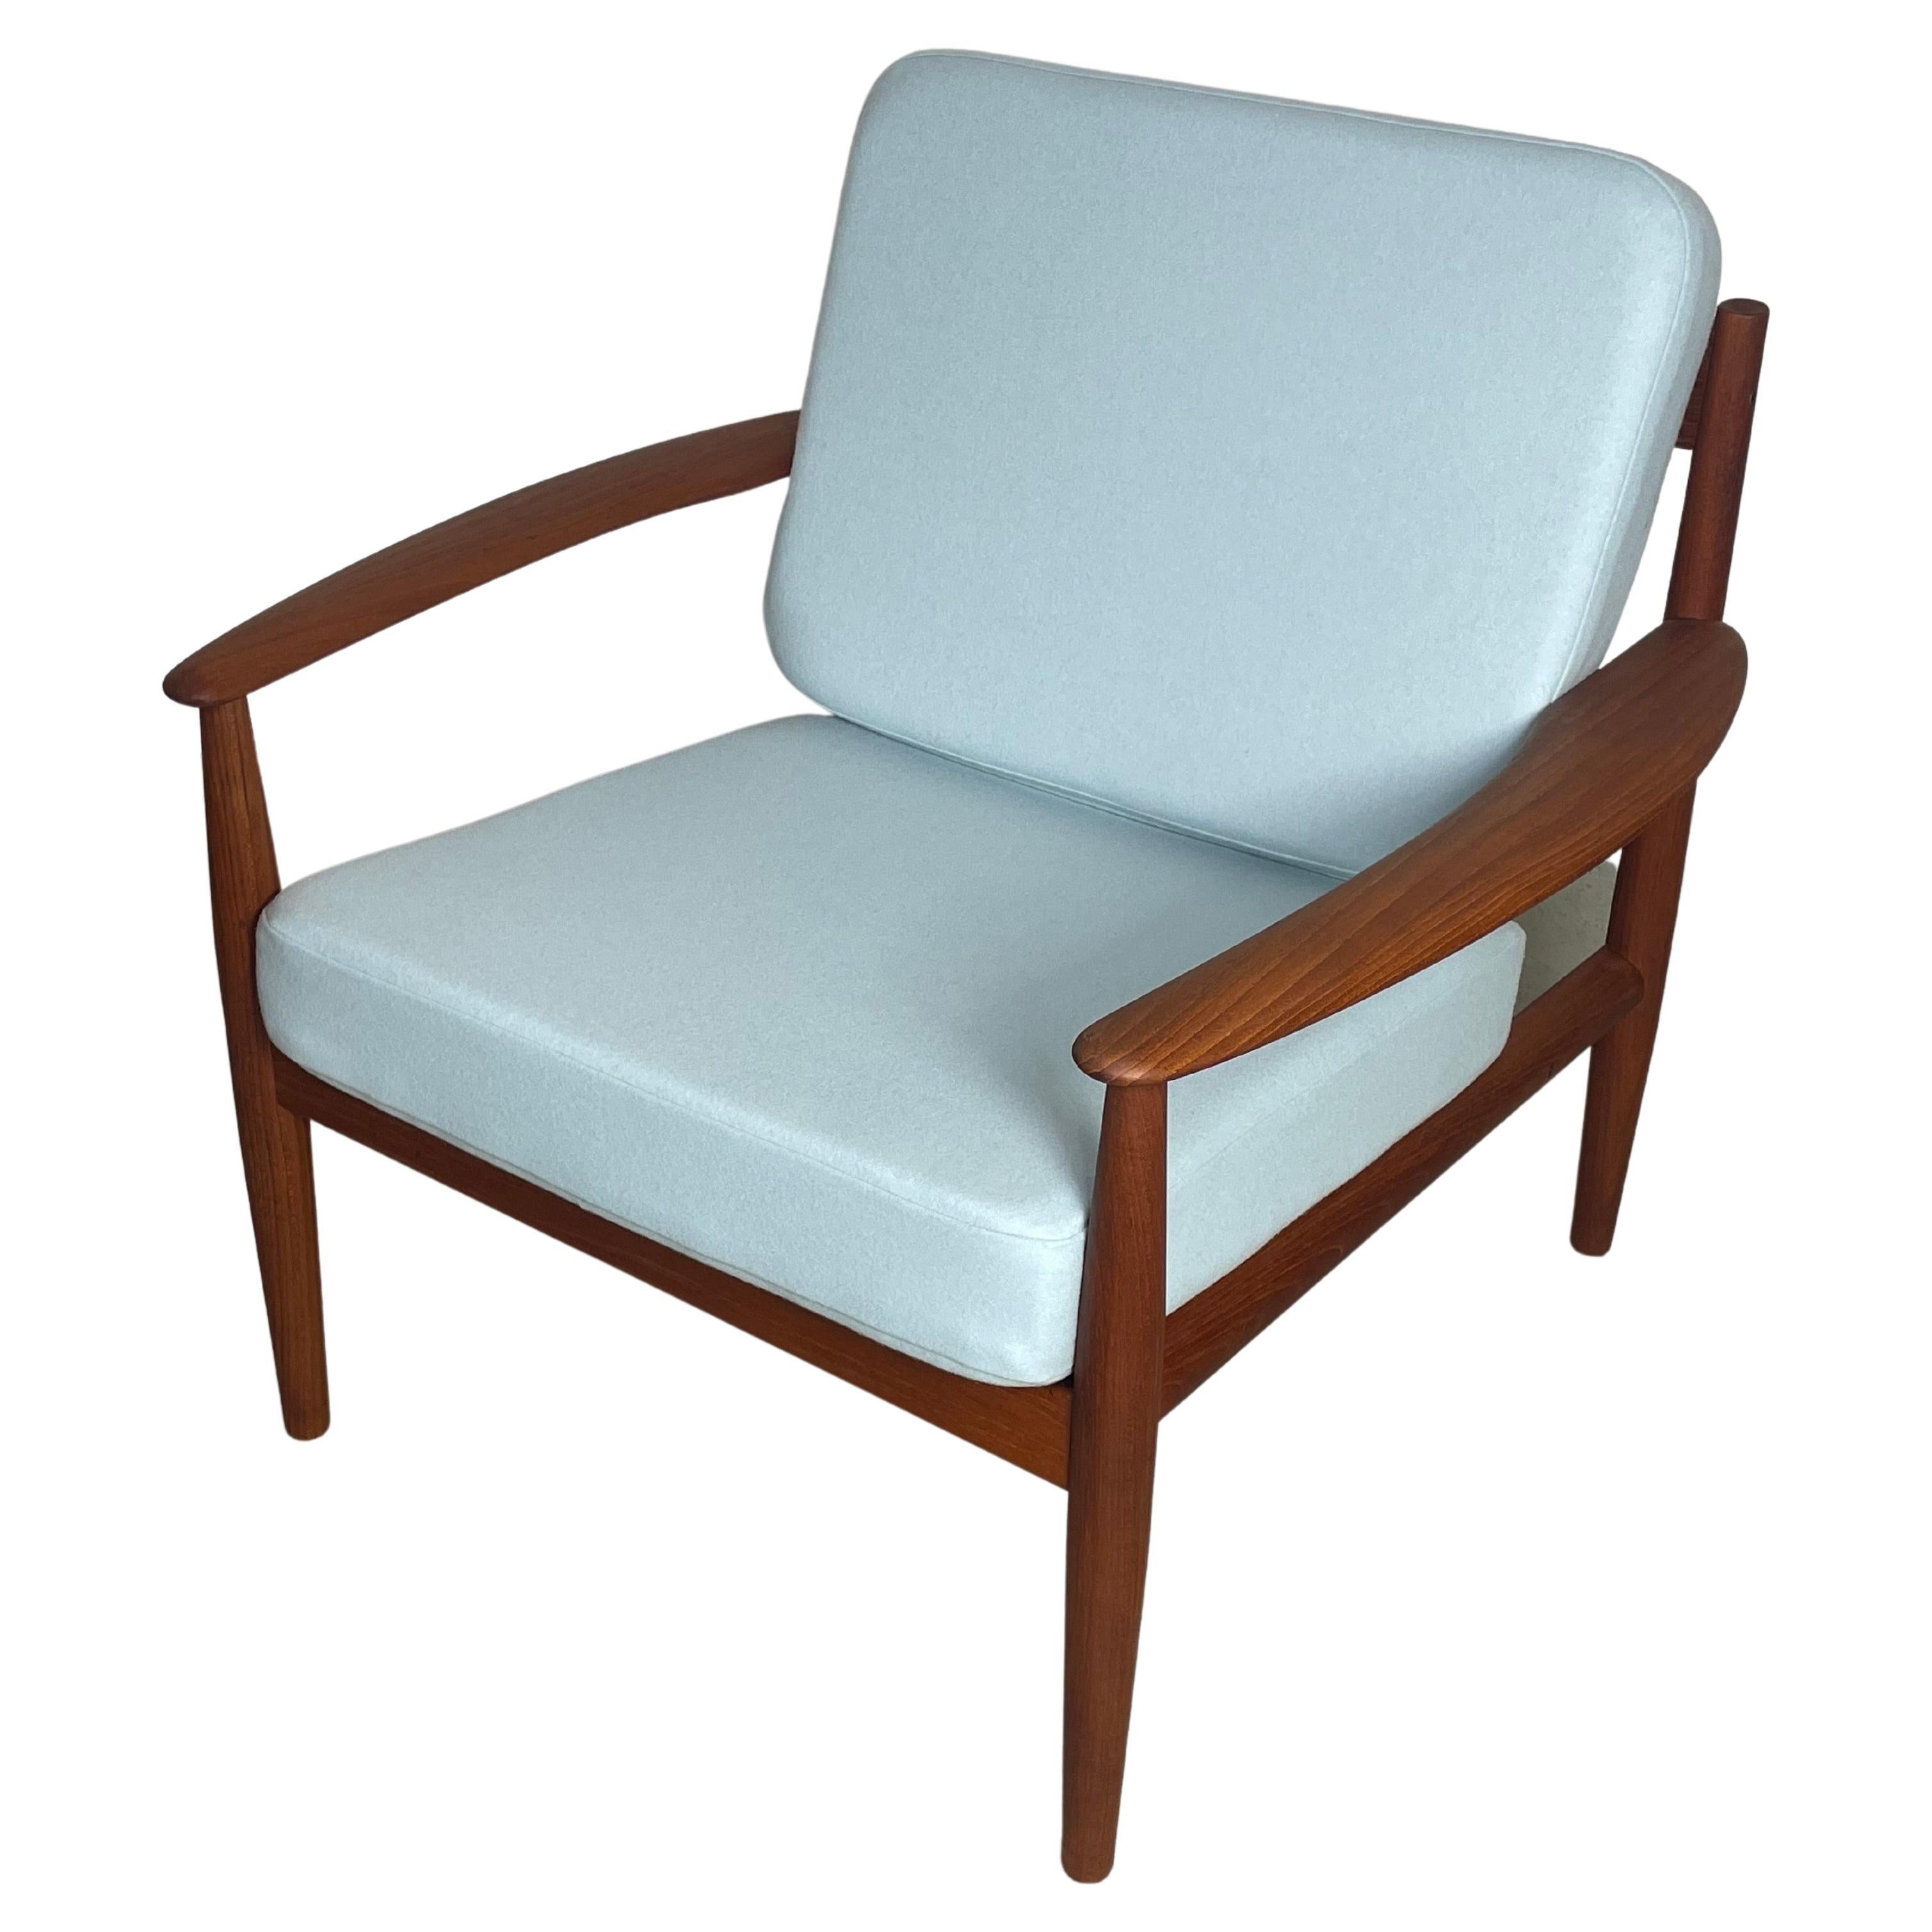 Classic easy chair by Grete Jalk for France & Son. Made in Denamark during the 1950s. Produced by France & Son. Features a high-quality solid wooden frame made of teak with new upholstery and removable cover in a high-quality woolen fabric.